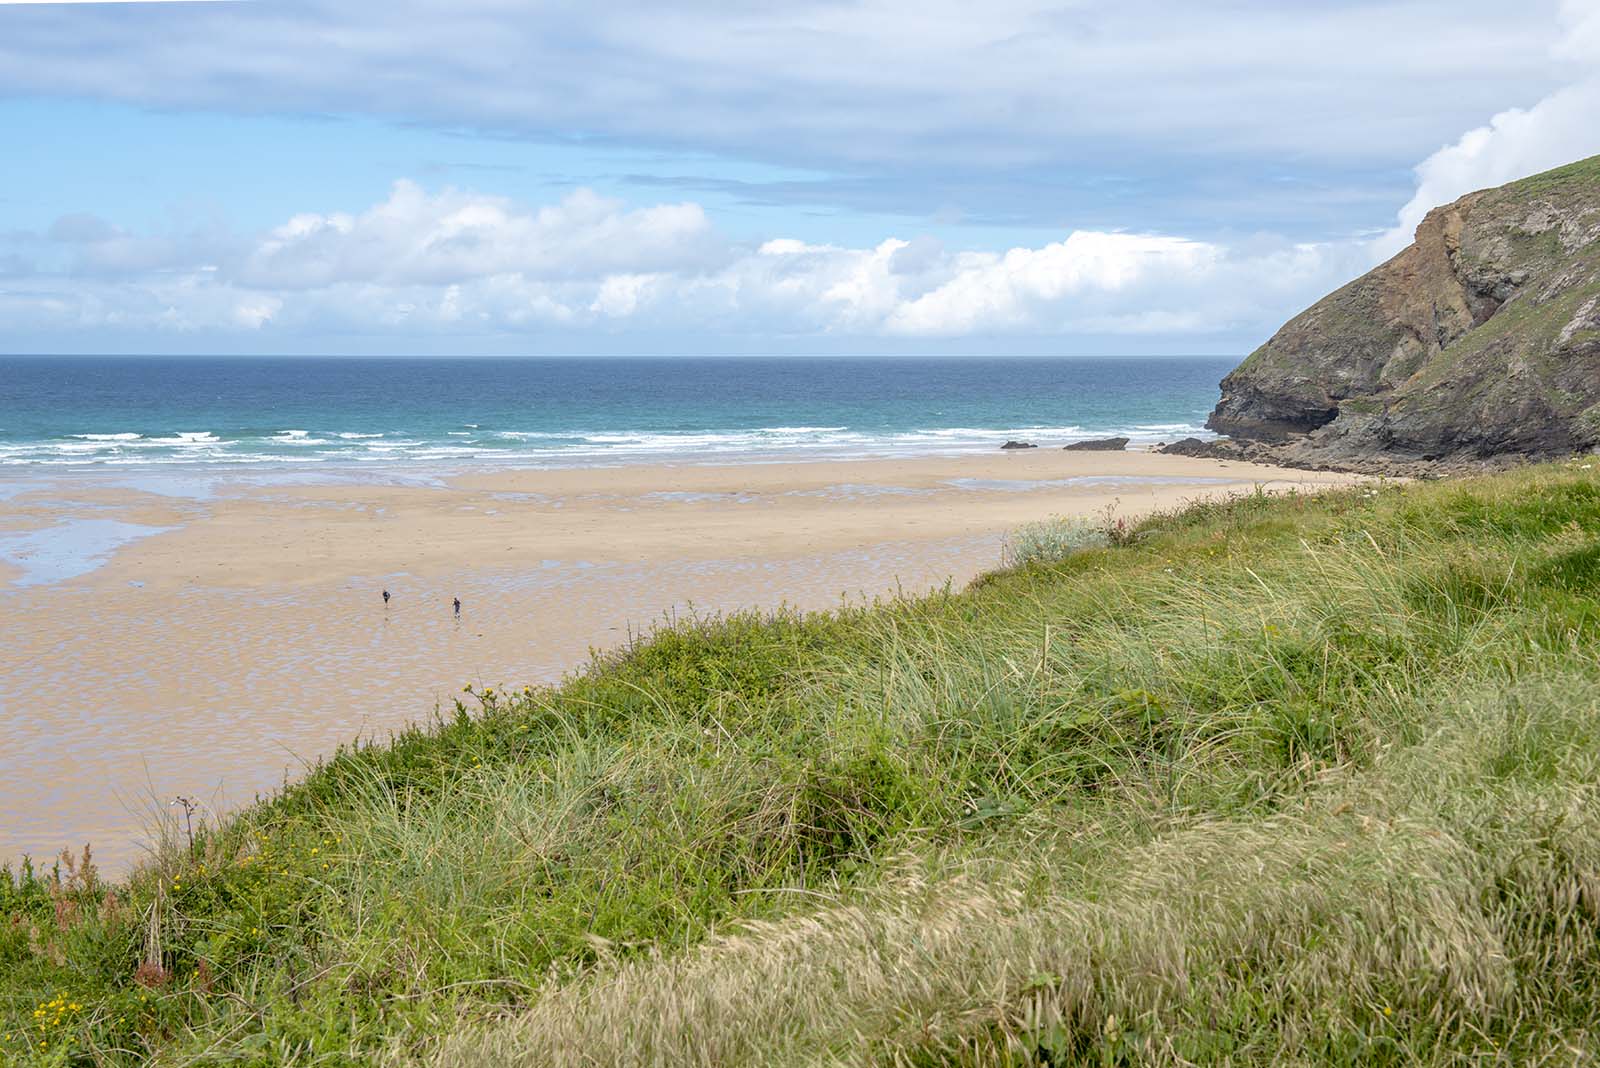 A Relaxing Weekend in Mawgan Porth